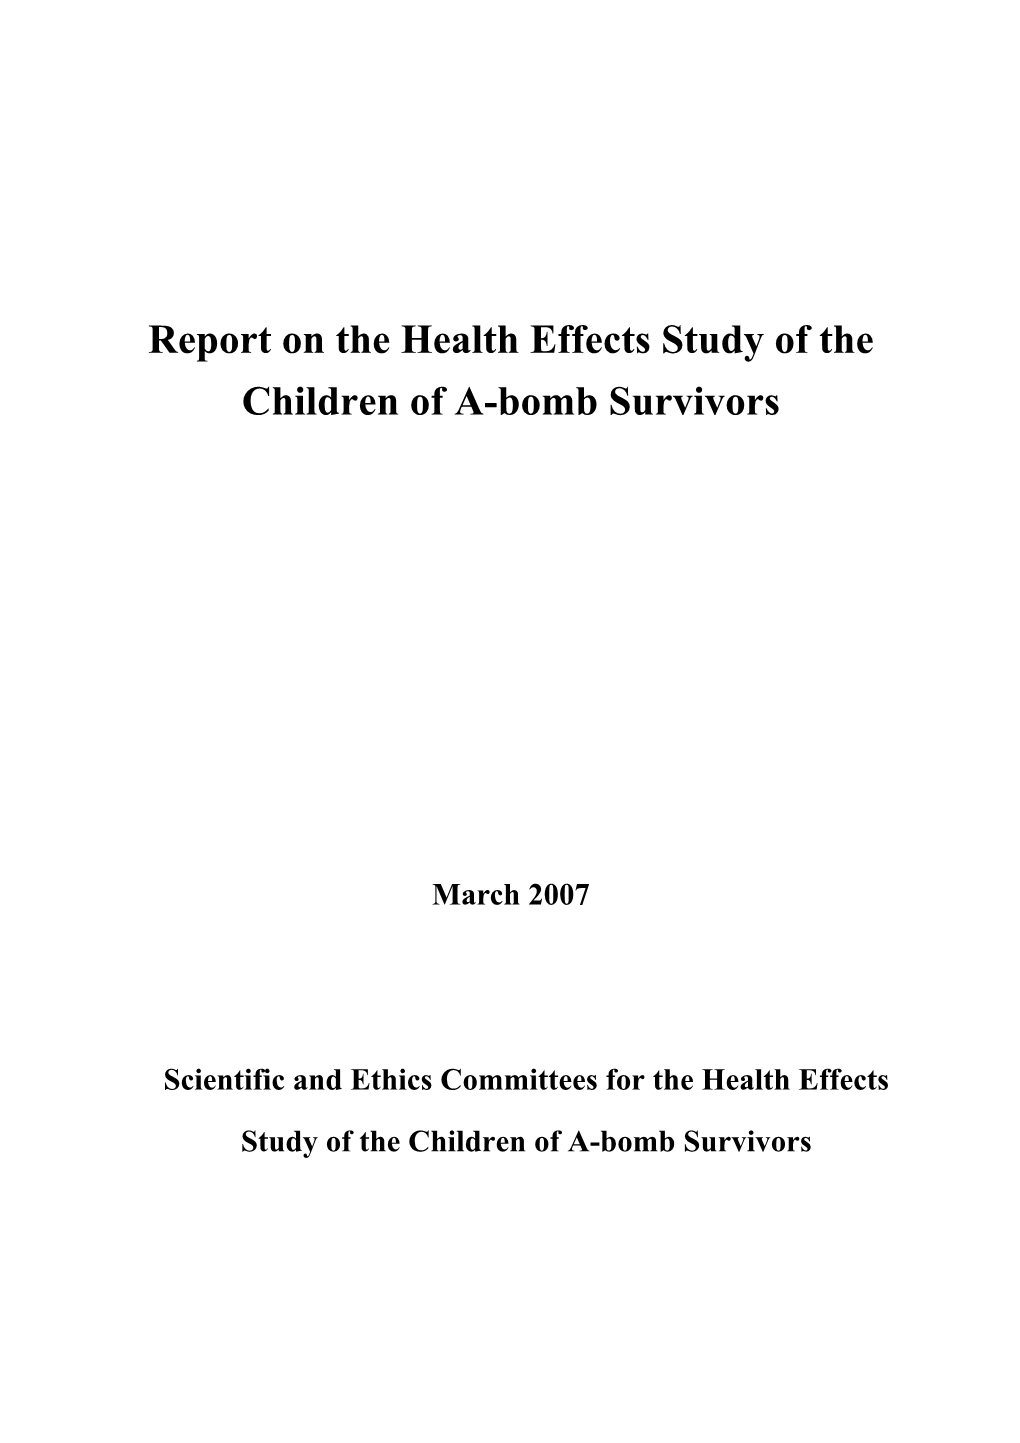 Report on the Health Effects Study of the Children of A-Bomb Survivors